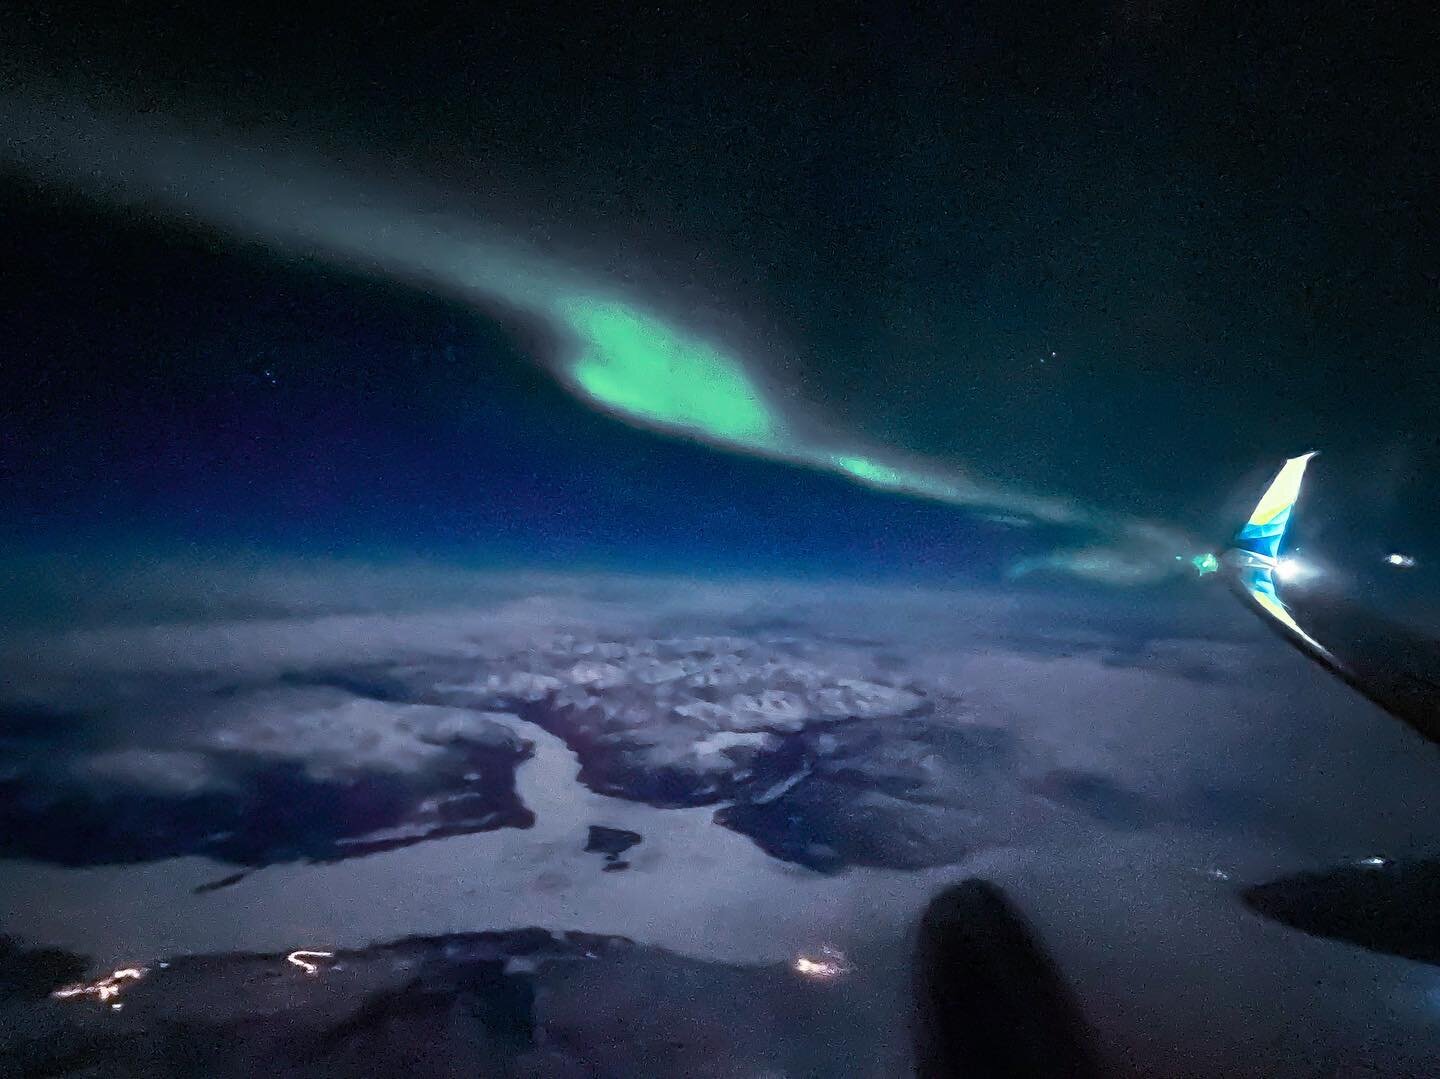 Crappy iPhone photo at 36,000 feet over the Yukon Territory en route to Fairbanks. I'm heading out on an Aurora photo tour tonight with dodgy conditions. Hopefully this isn't the only Aurora I see.
 
6 February 2023

#aurora #northernlights #shotonip